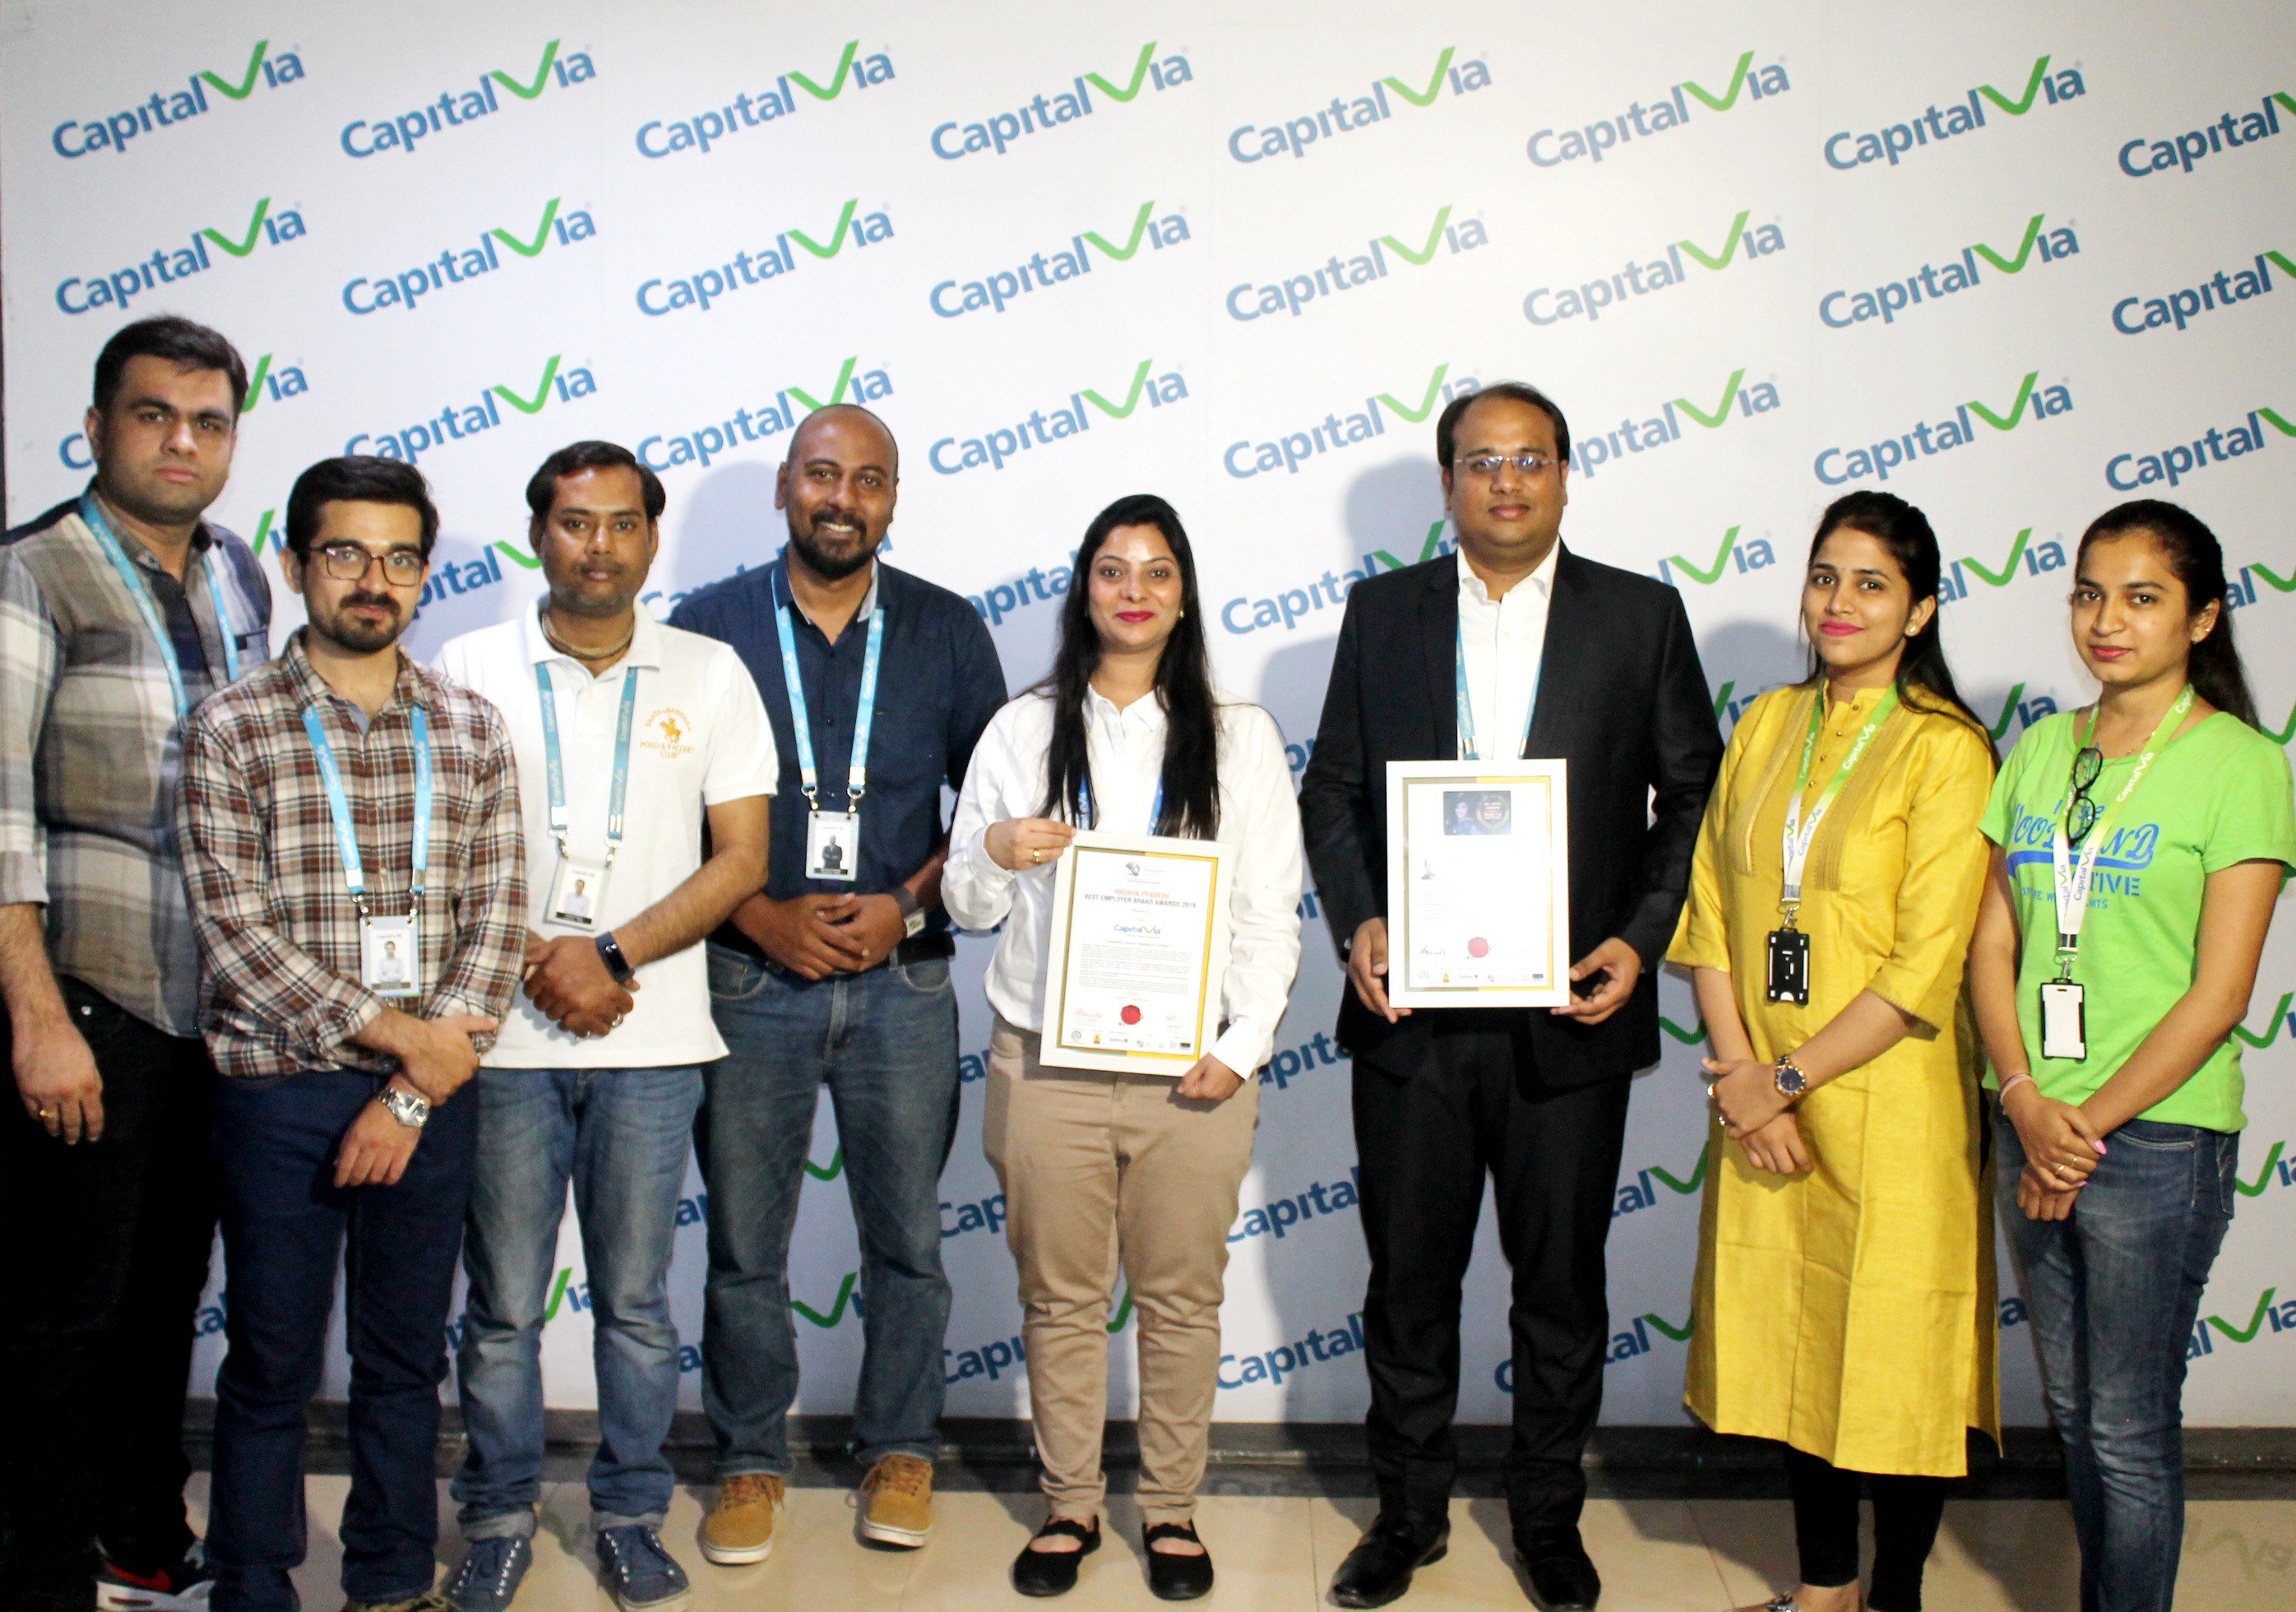 capitalvia auf twitter: "capitalvia is proud to get recognized as the #bestemployer brand in #madhyapradesh. this award is testimony to the fact that we have always treated human capital as our biggest